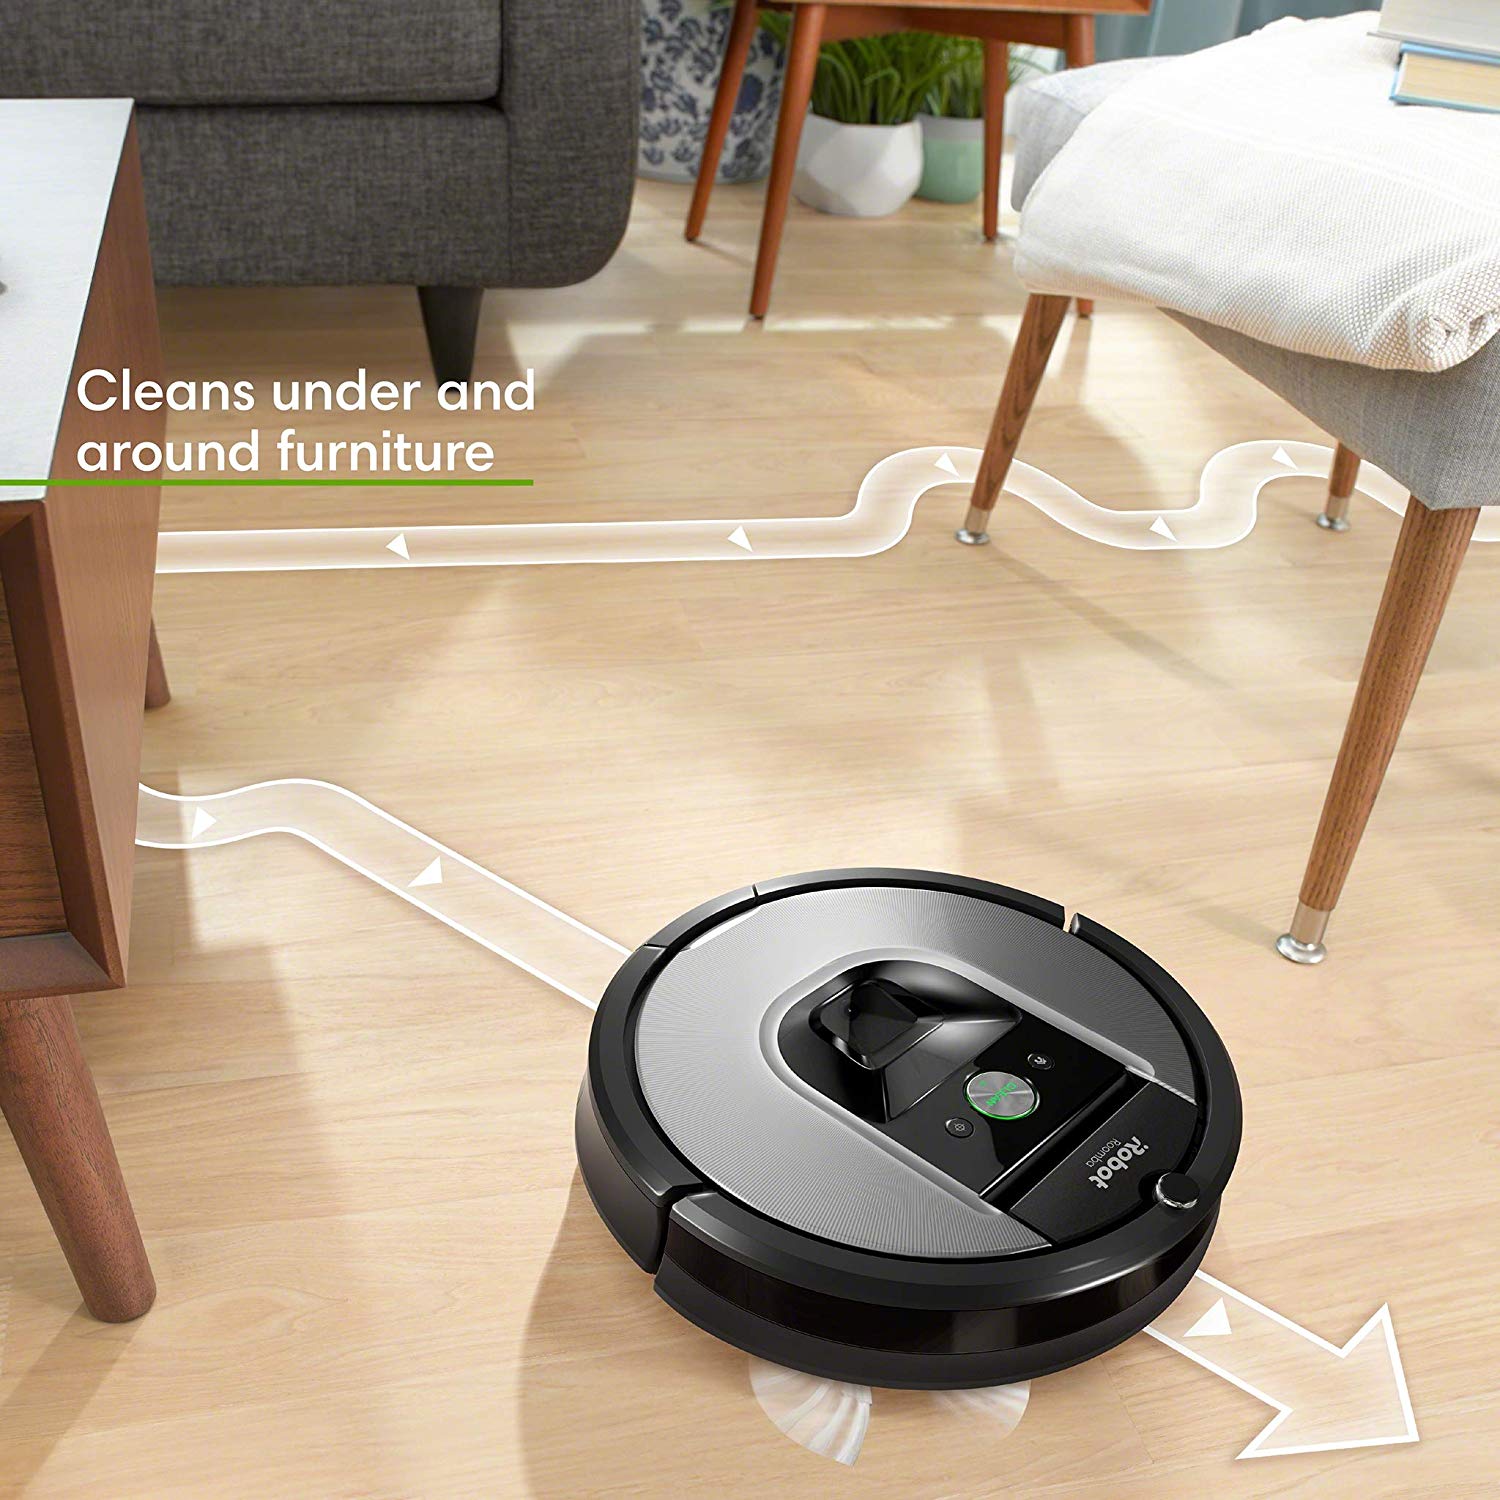 a diagram showing the cleaning path of an iRobot Roomba